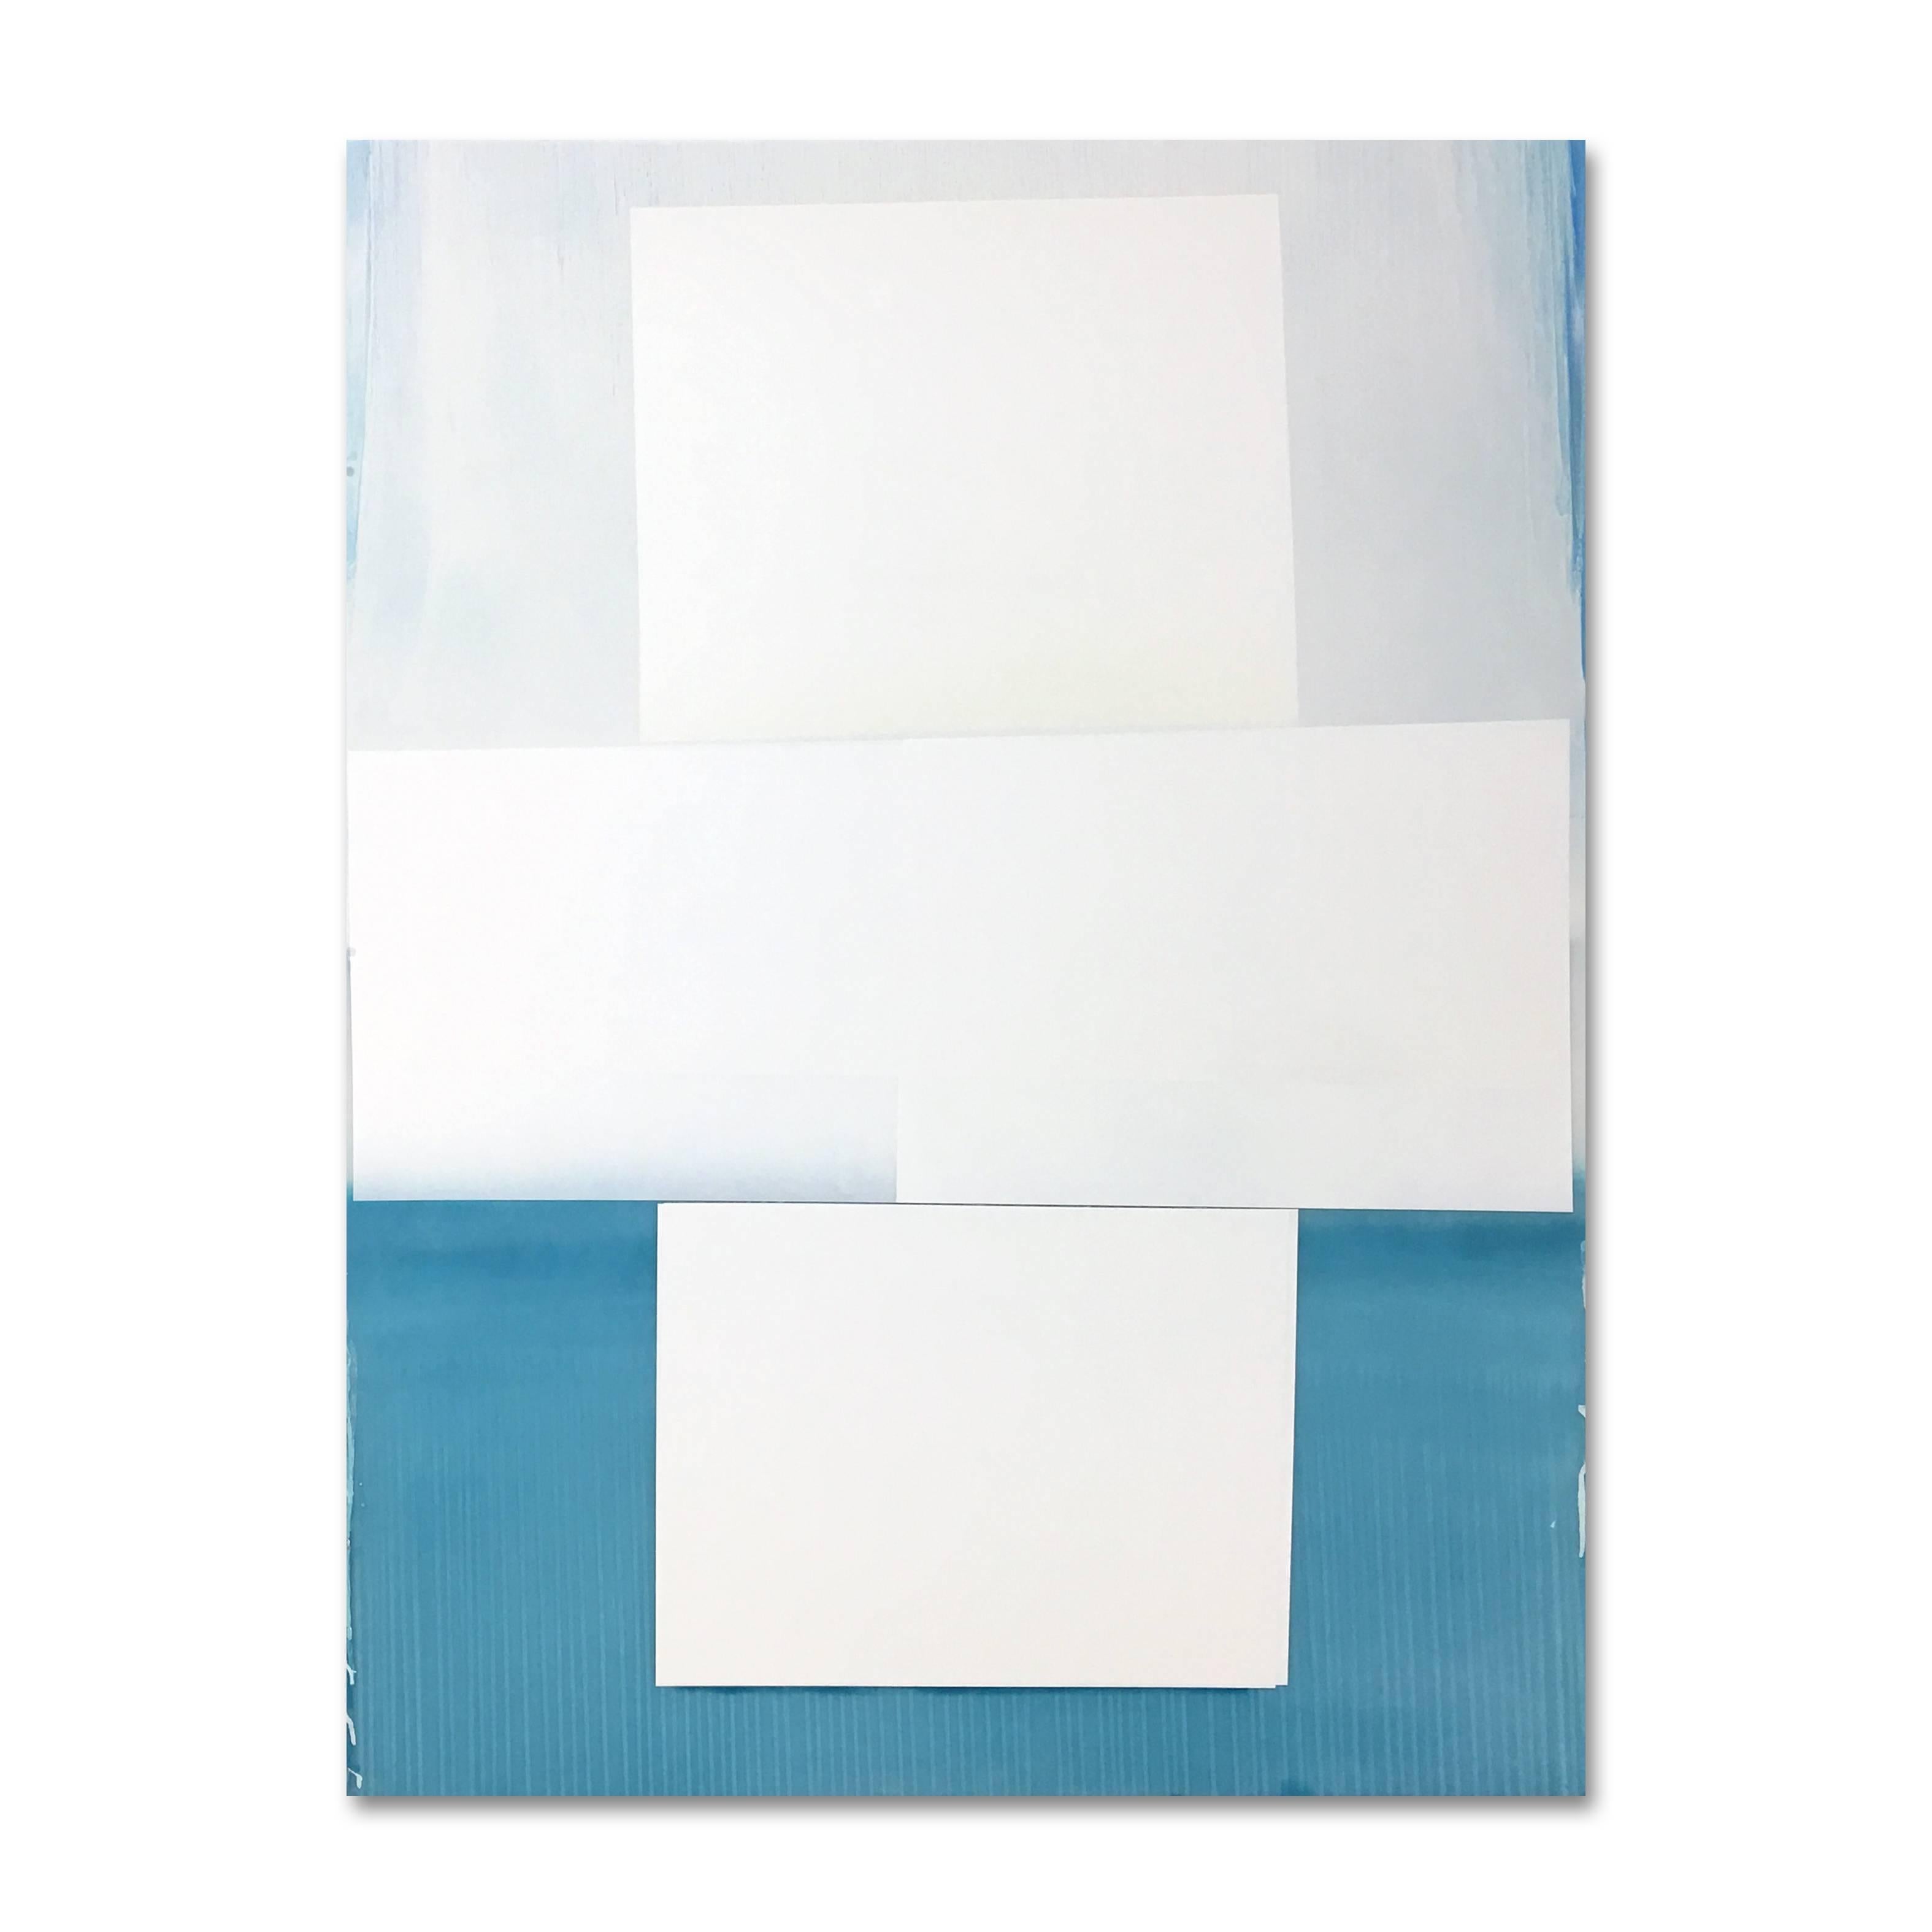 Jeffrey Cortland Jones
Replicant (Mute Grab), 2016
enamel on acrylic panel
48 x 36 in.

This original enamel painting on acrylic panel by Jeffrey Cortland-Jones represents is signature minimalist style, with layered rectangular shapes in shades of